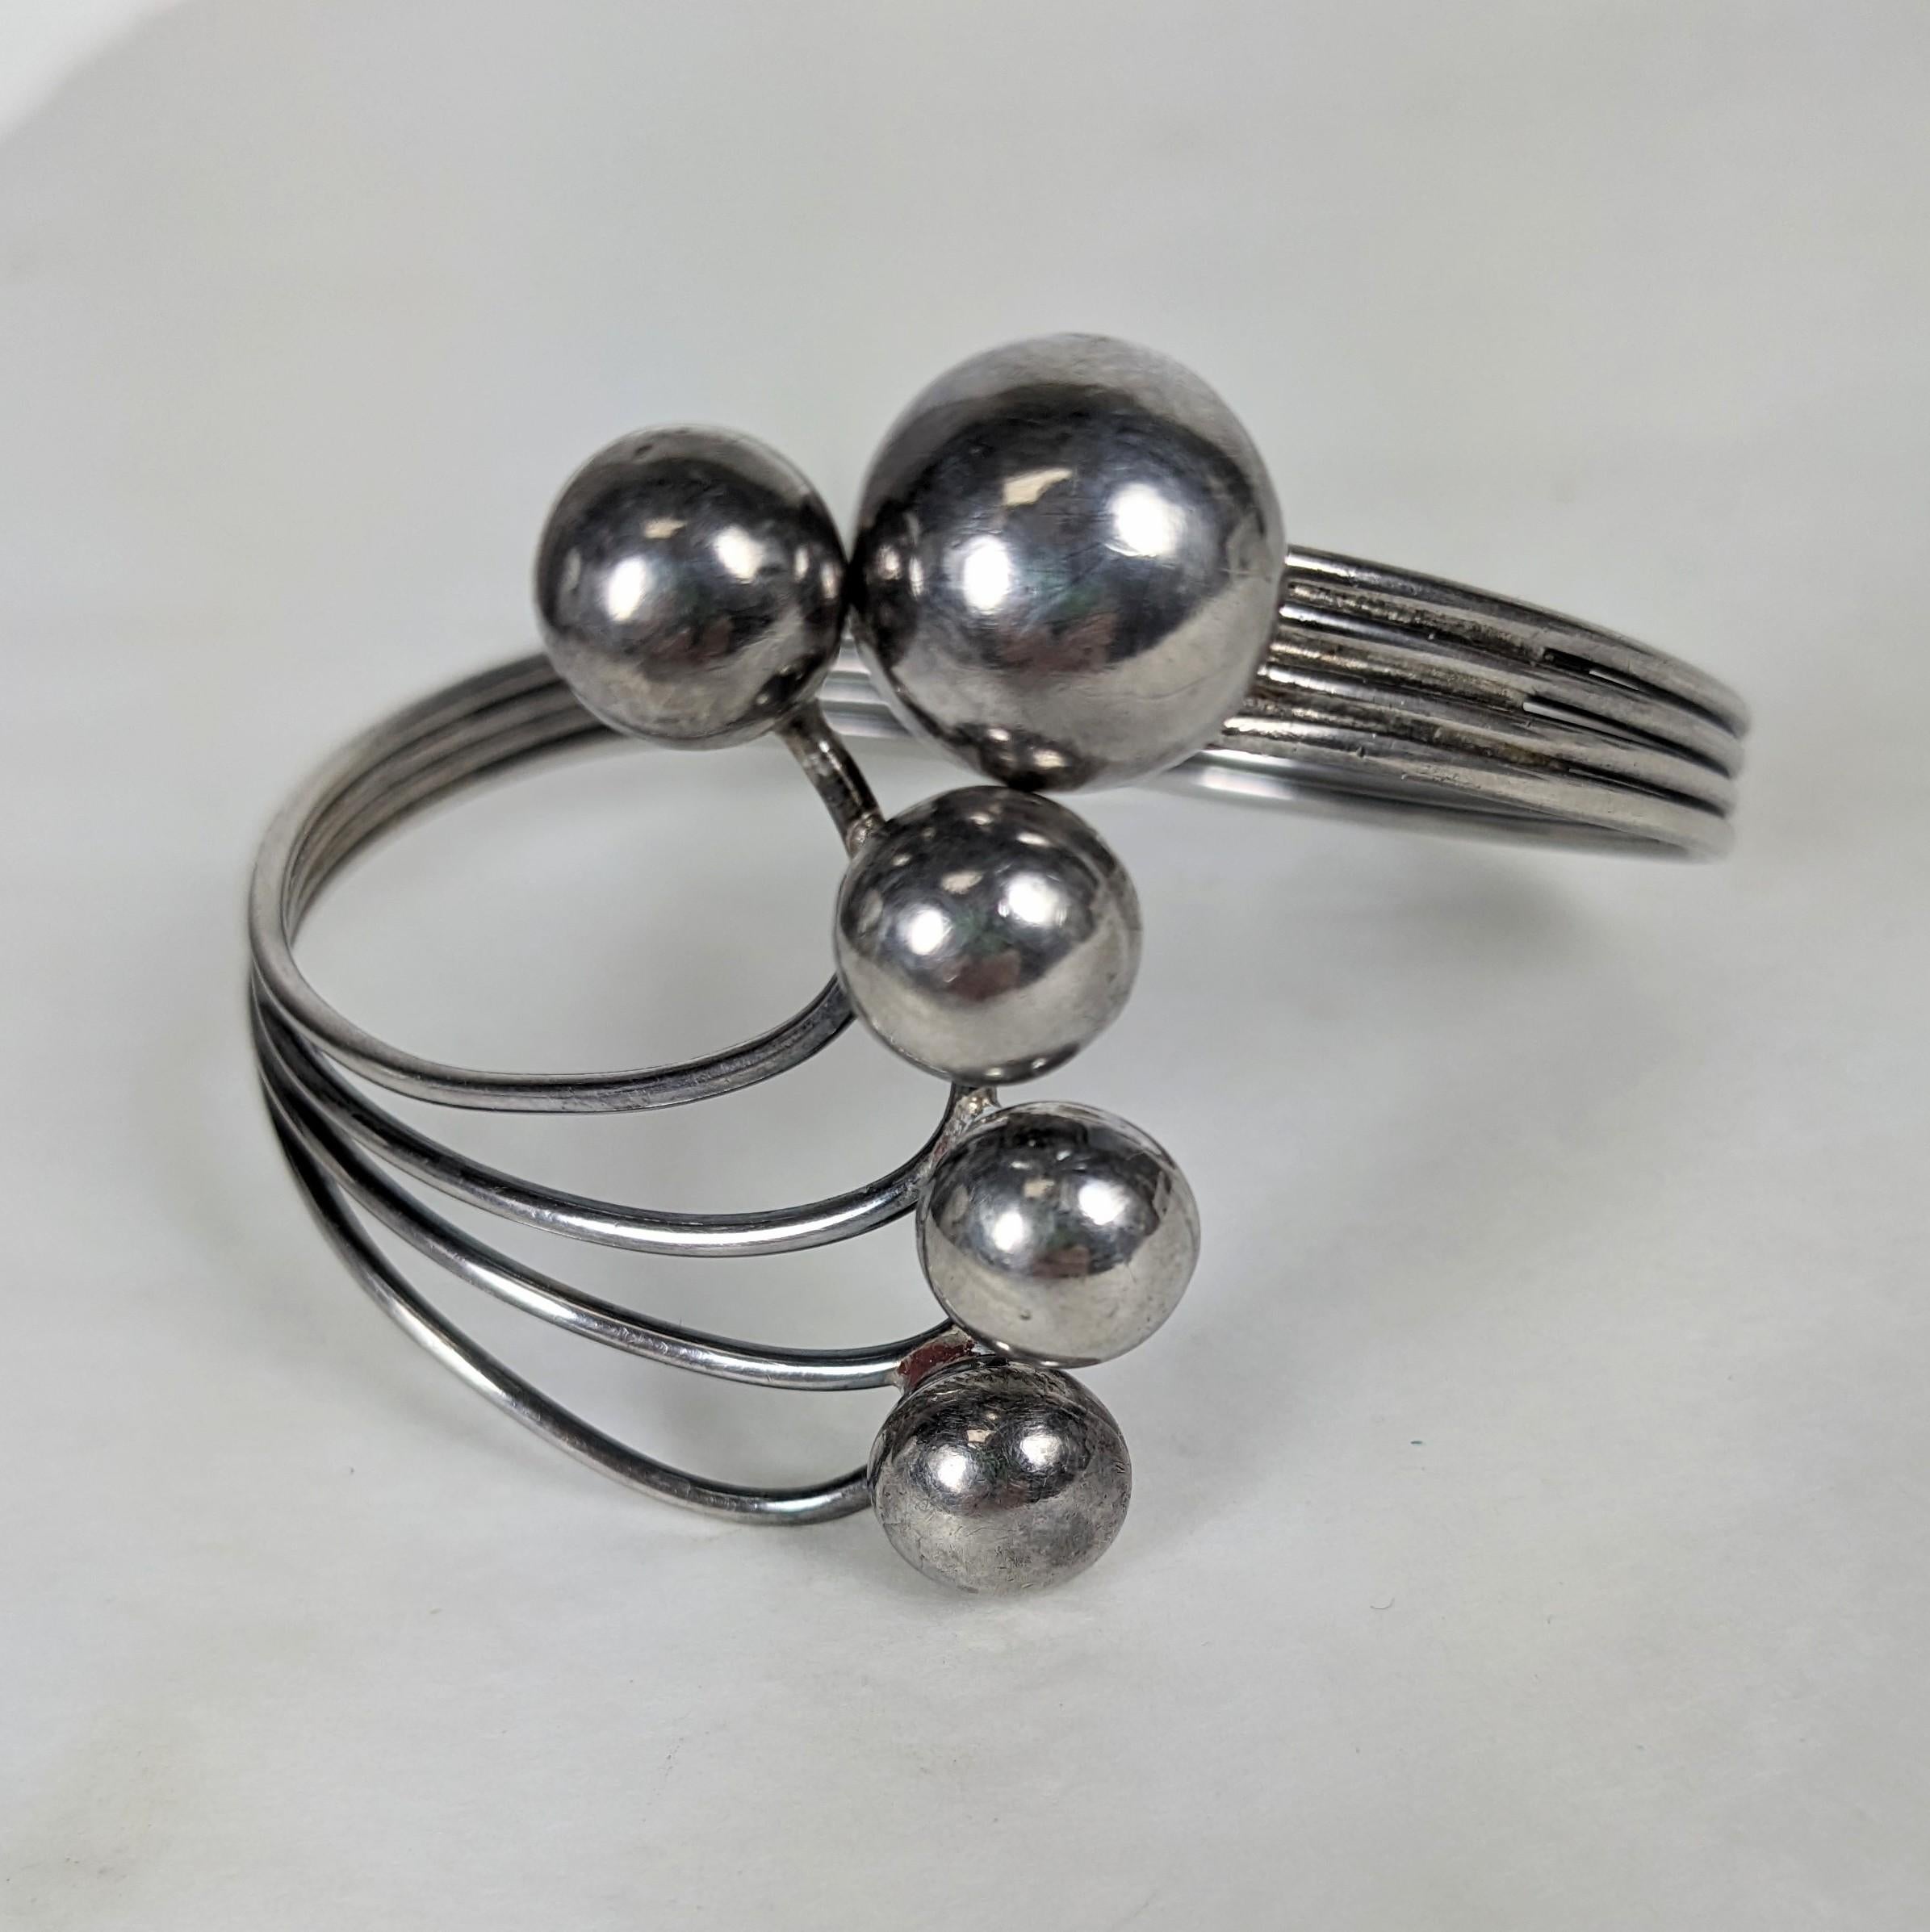 Sterling Modernist Clamper from the 1940's. Handmade with 4 wires and handmade ball motifs. The largest ball clamps around the arc of the other 4. Measures 2